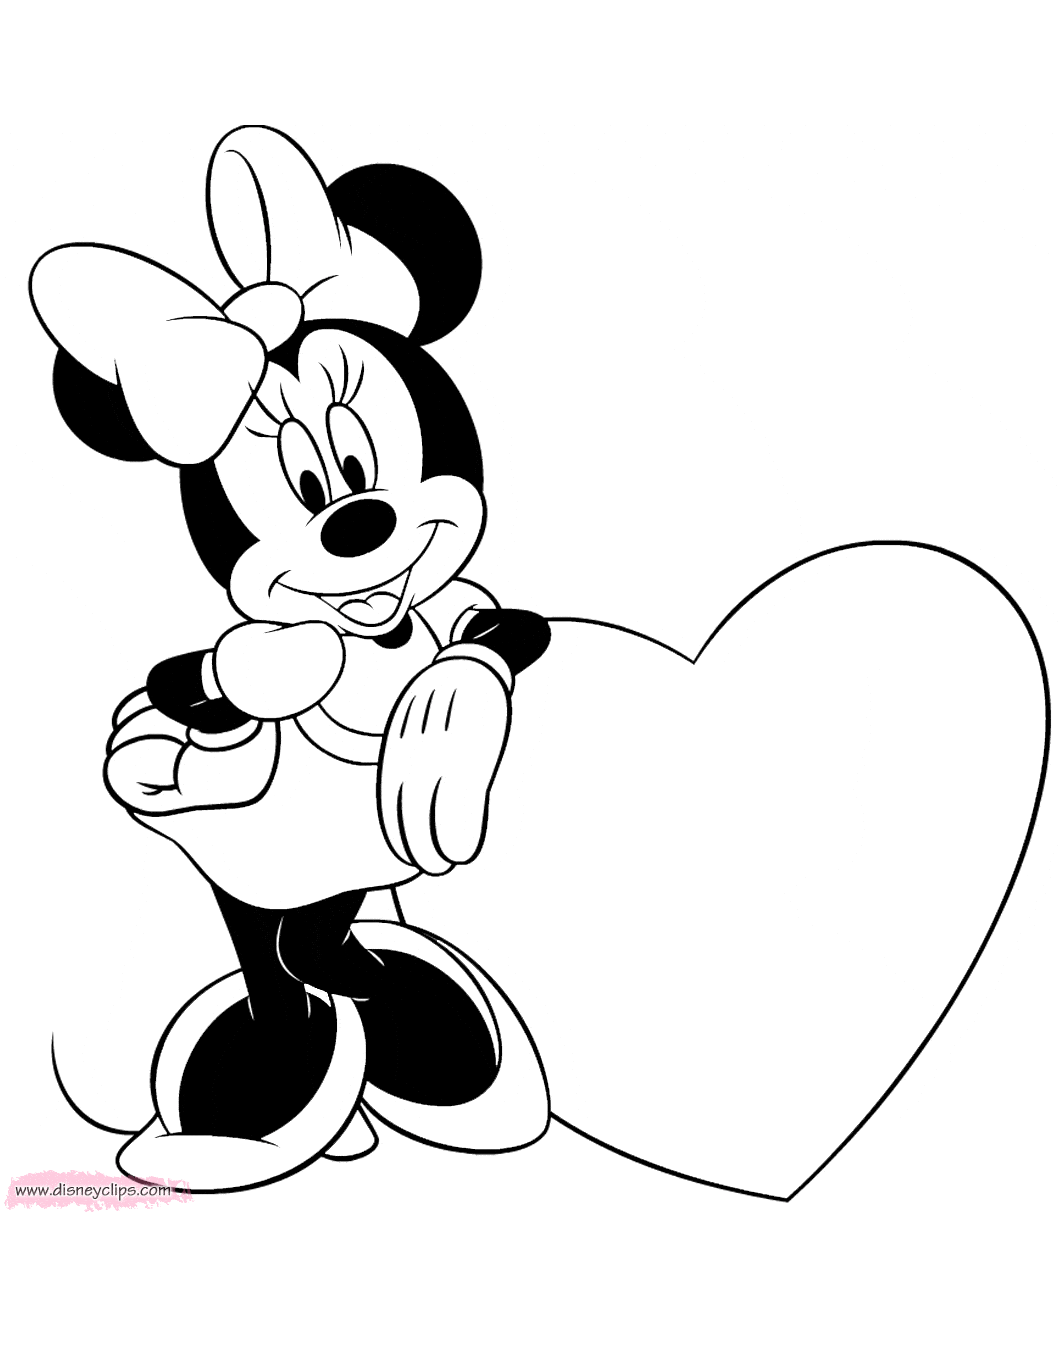 Disney Valentine's Day Coloring Pages (2) | Disneyclips.com